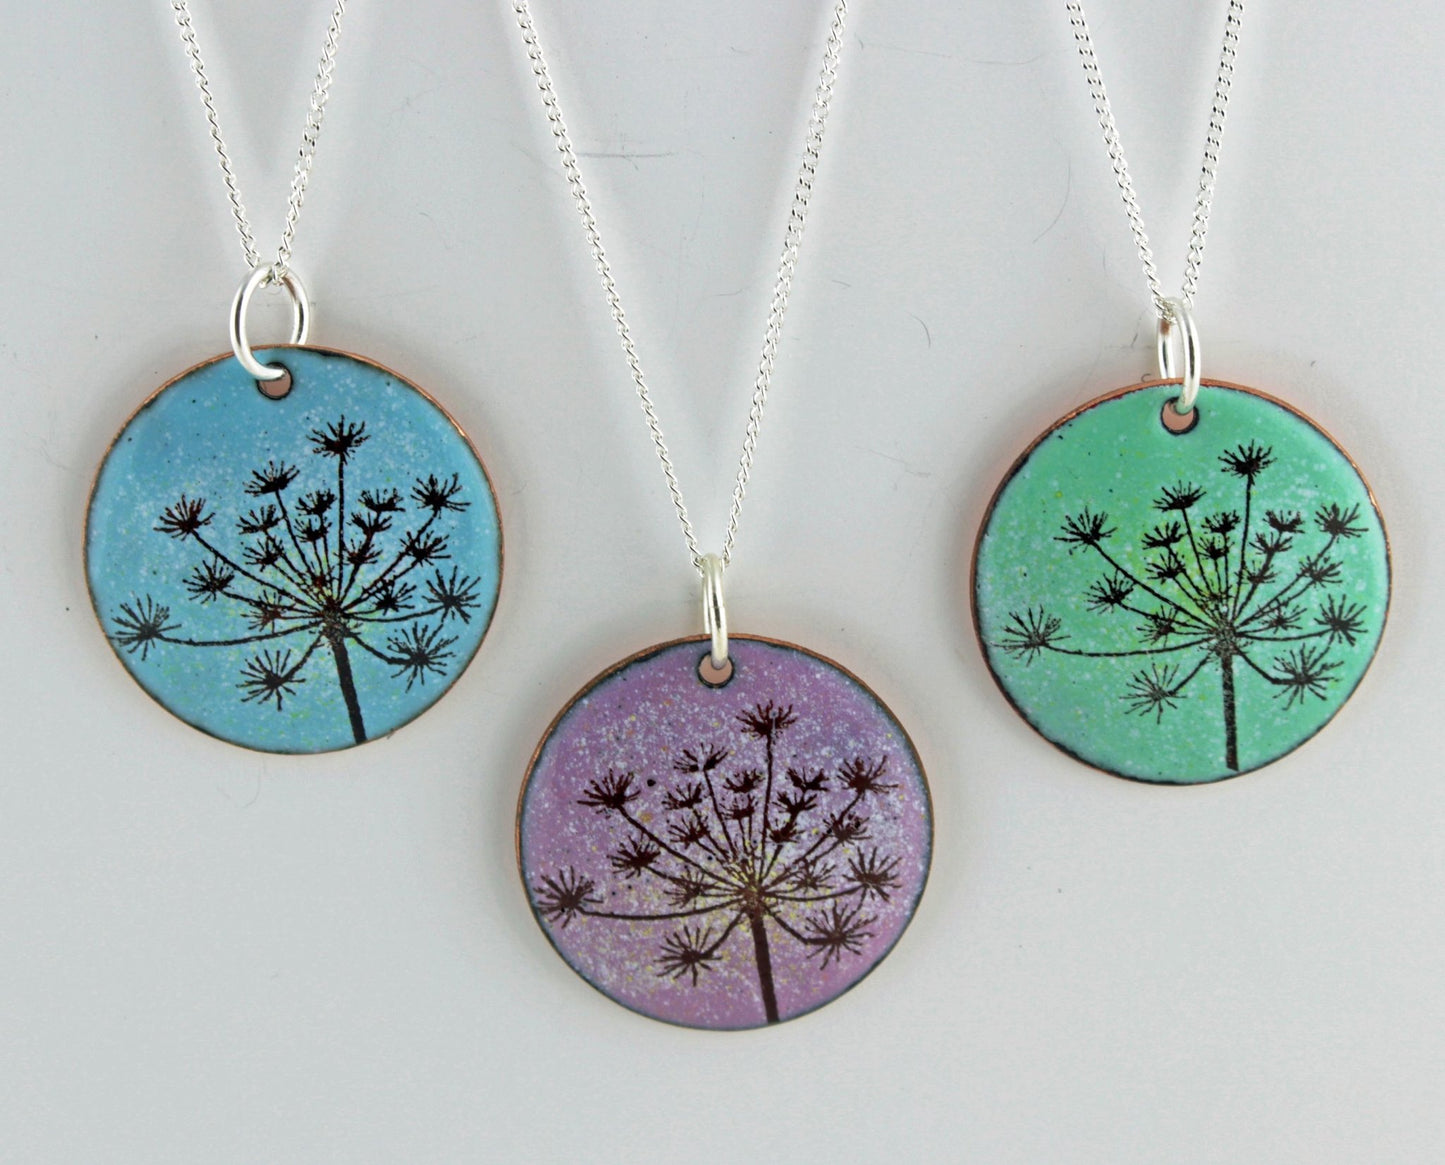 Cow Parsley Enamel Pendant on 18' sterling silver chain available in blue, green, lilac/pink - Katie Johnston Jewellery